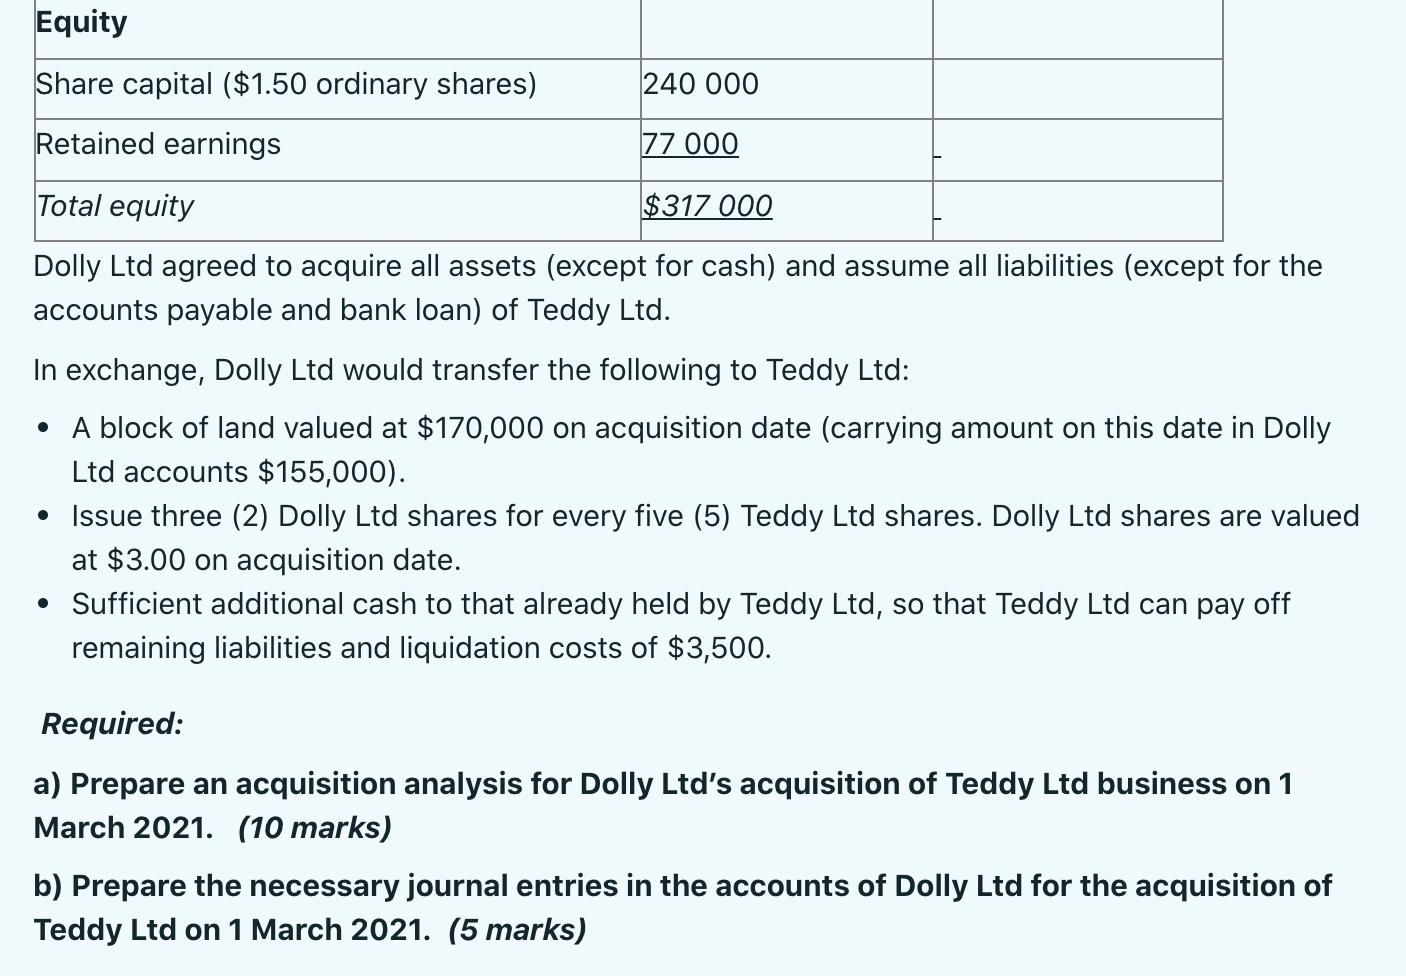 EquityShare capital ($1.50 ordinary shares)240 000Retained earnings77 000Total equity$317 000Dolly Ltd agreed to acqui